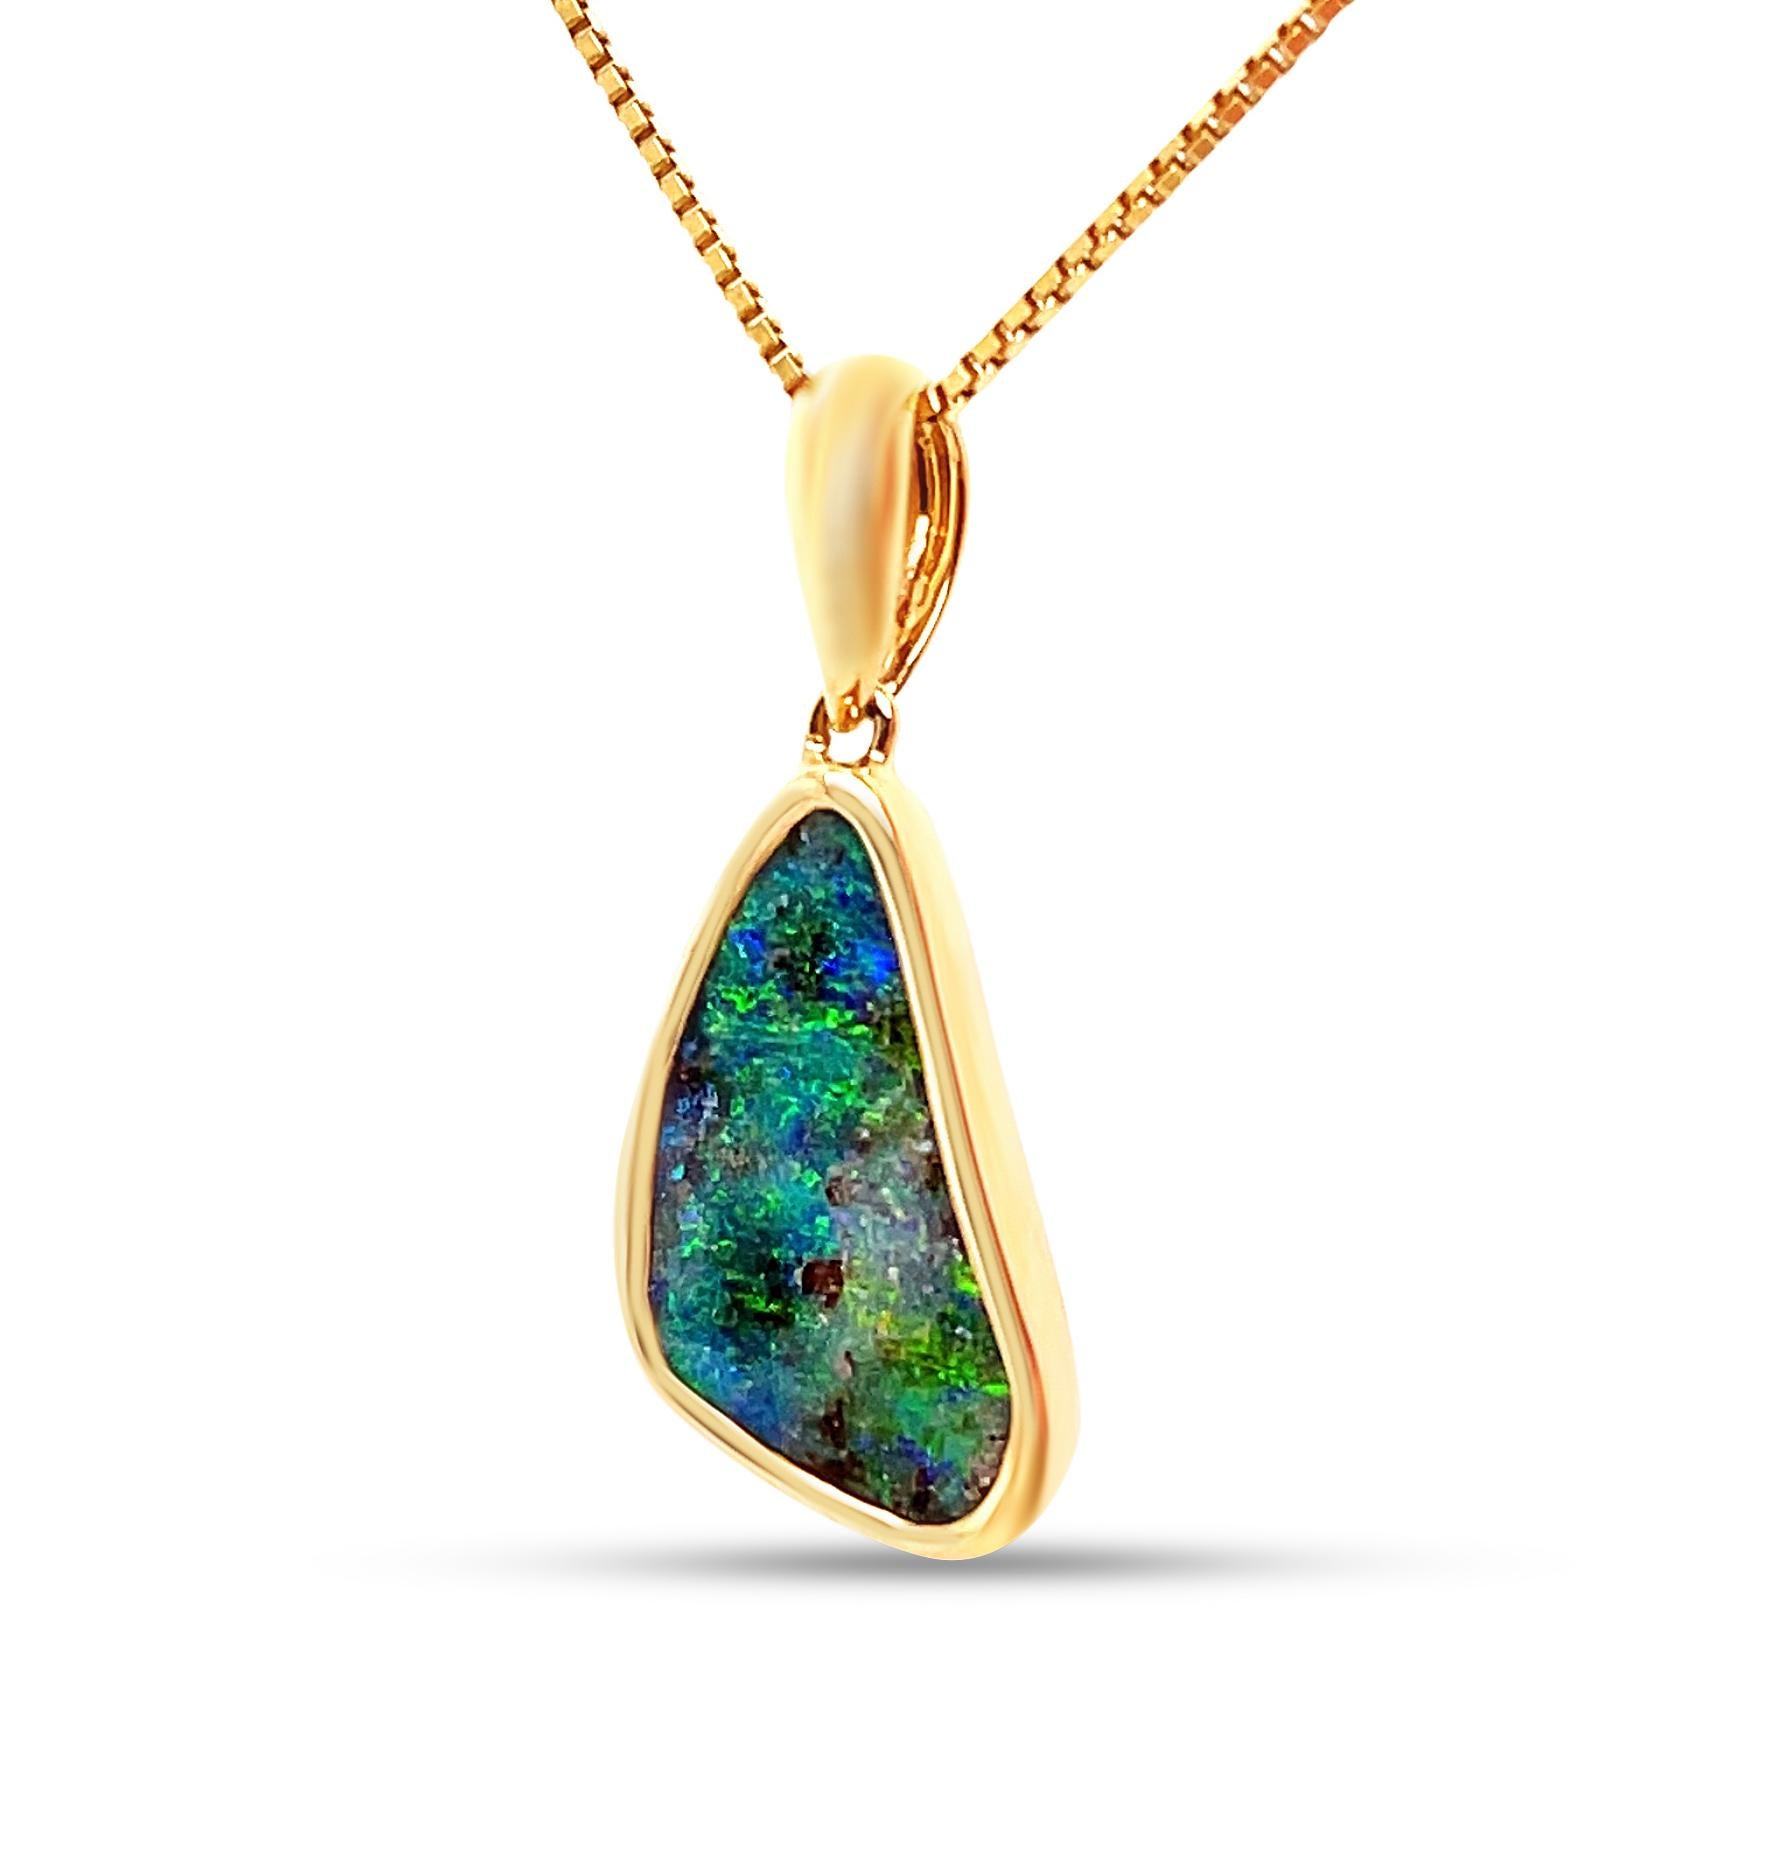 Cabochon Natural Solid Australian 4.46ct Boulder Opal Pendant Necklace in 18k Yellow Gold